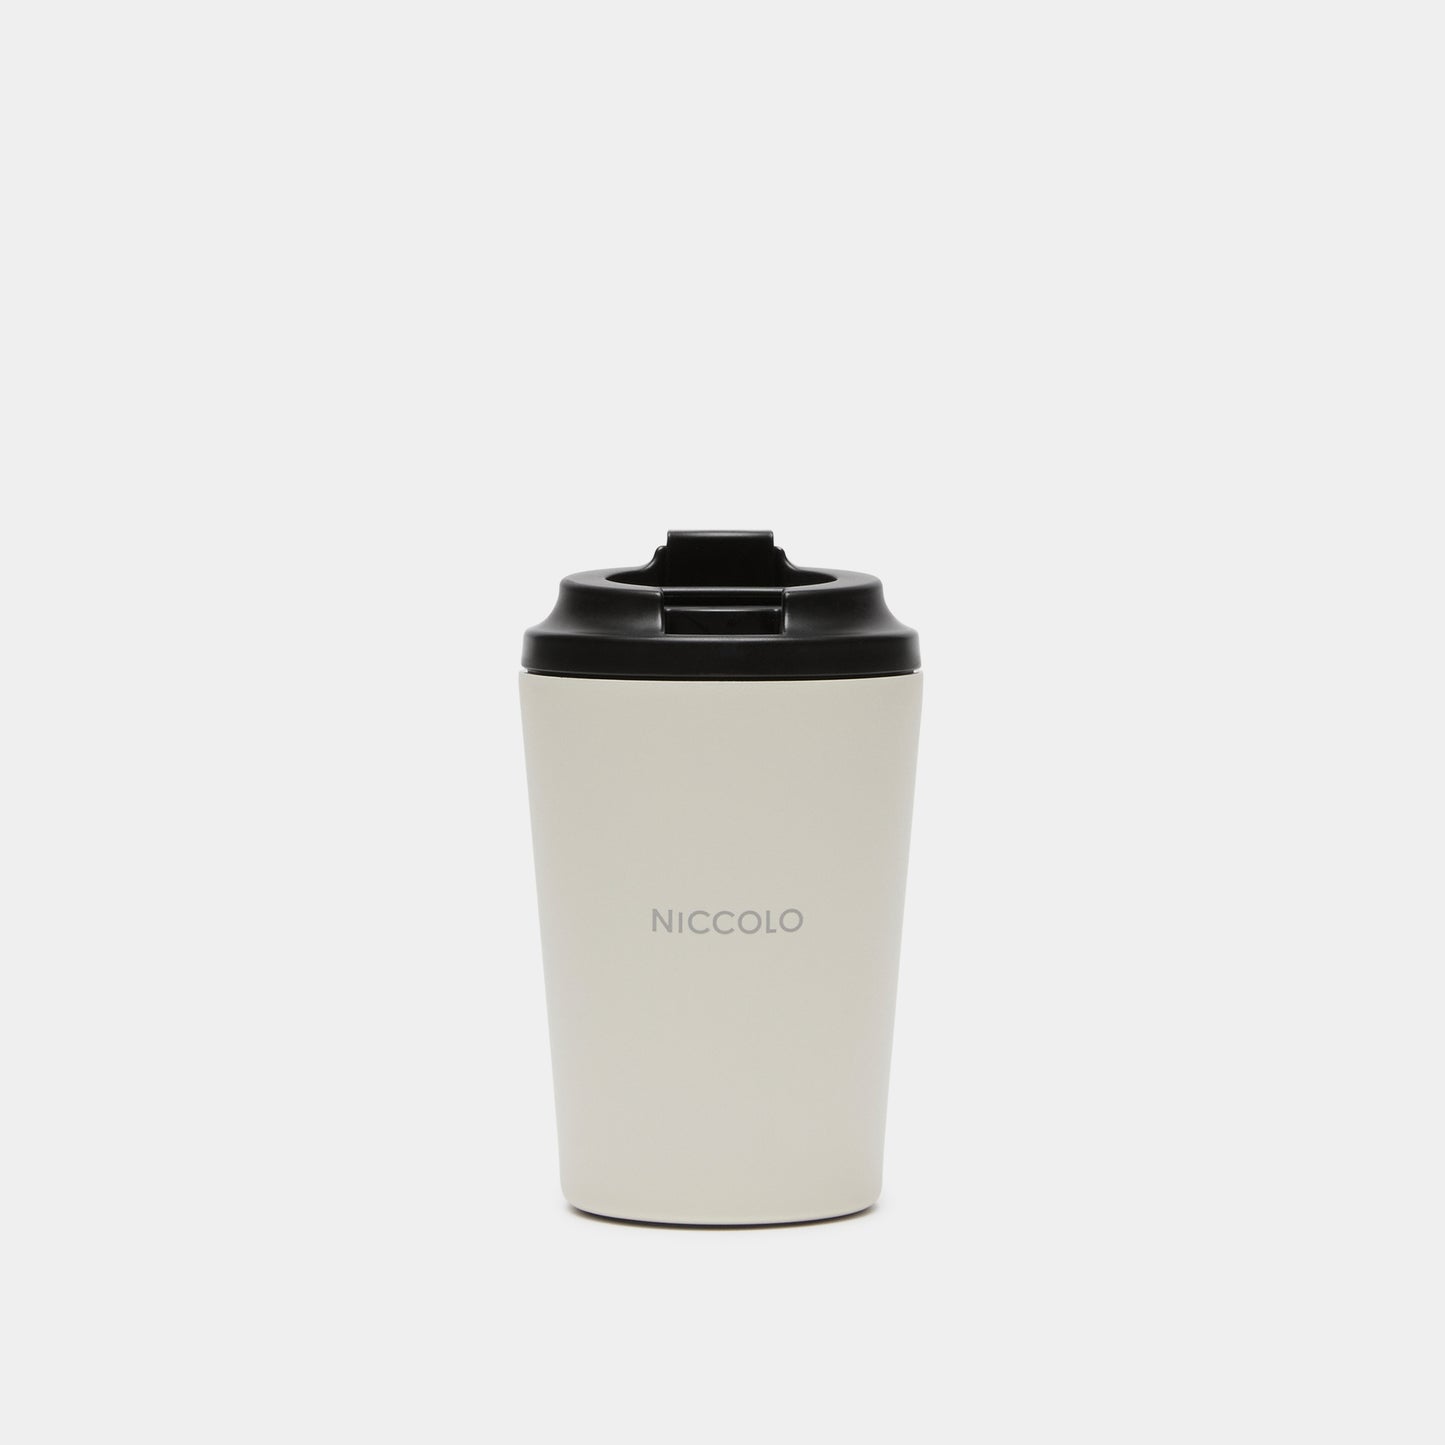 Niccolo Reusable Cup made by Fressko